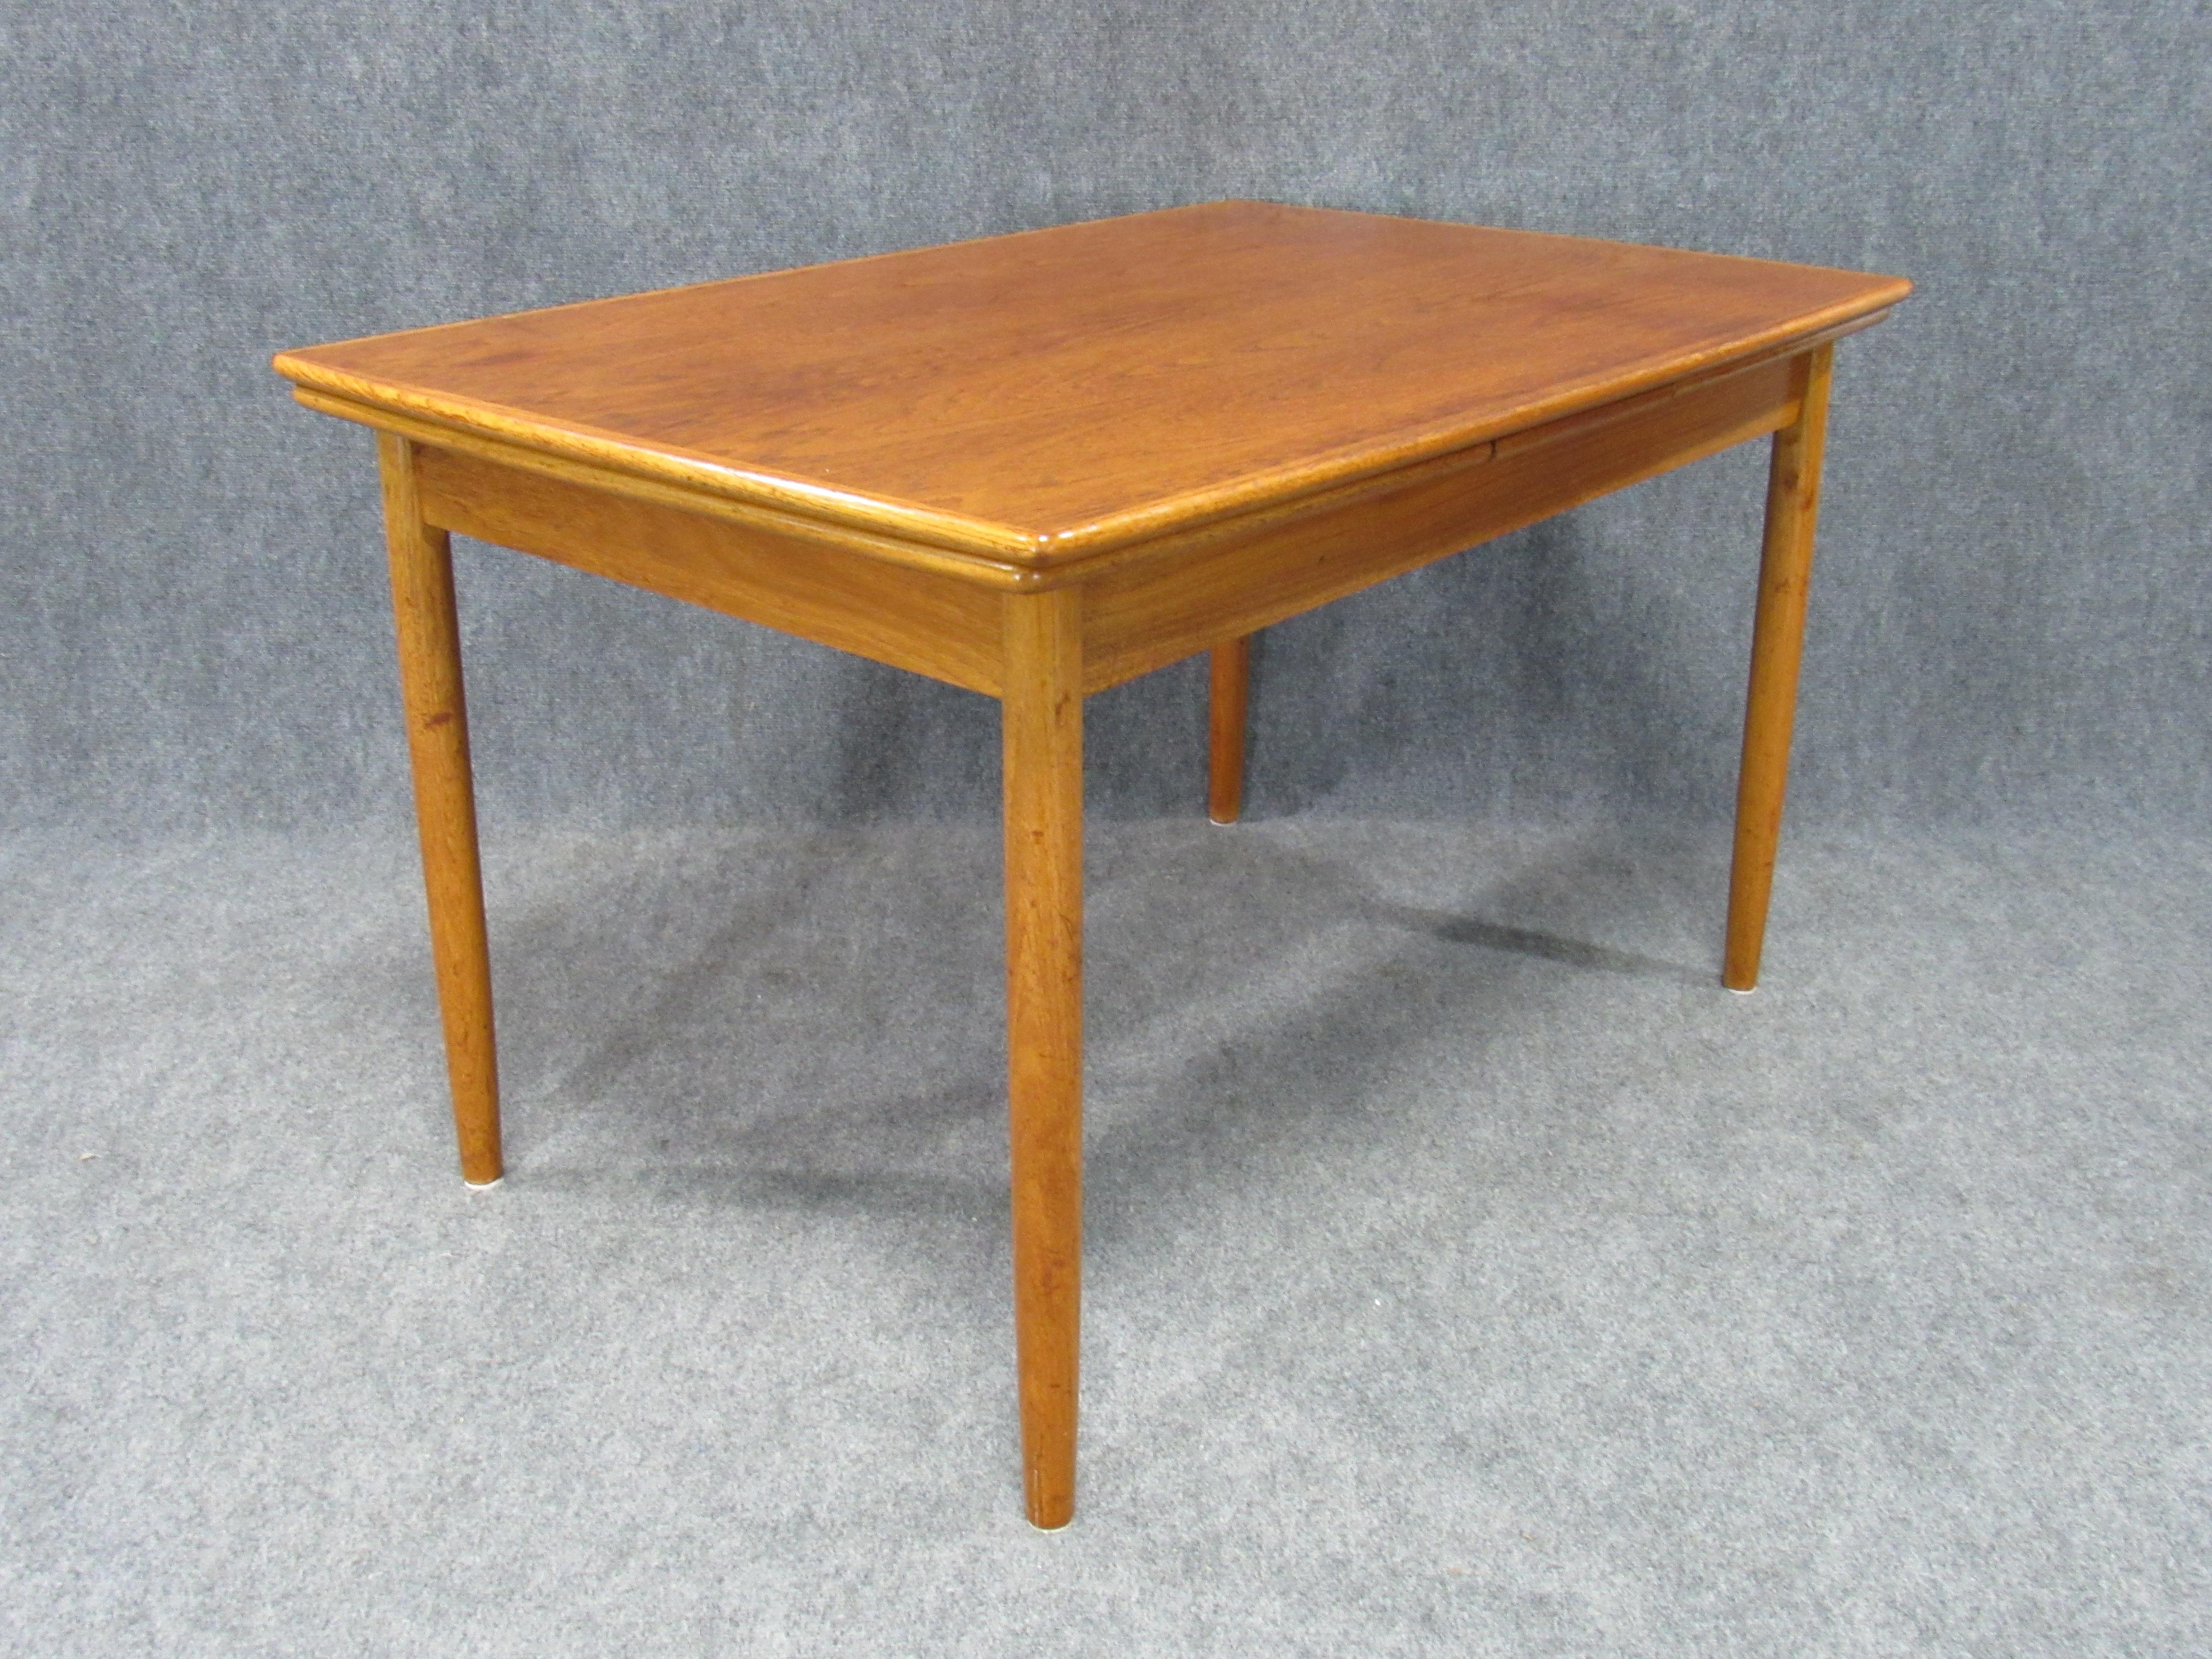 Midcentury Danish Modern Teak Dining Table with Two Pull-Out Leaves 5